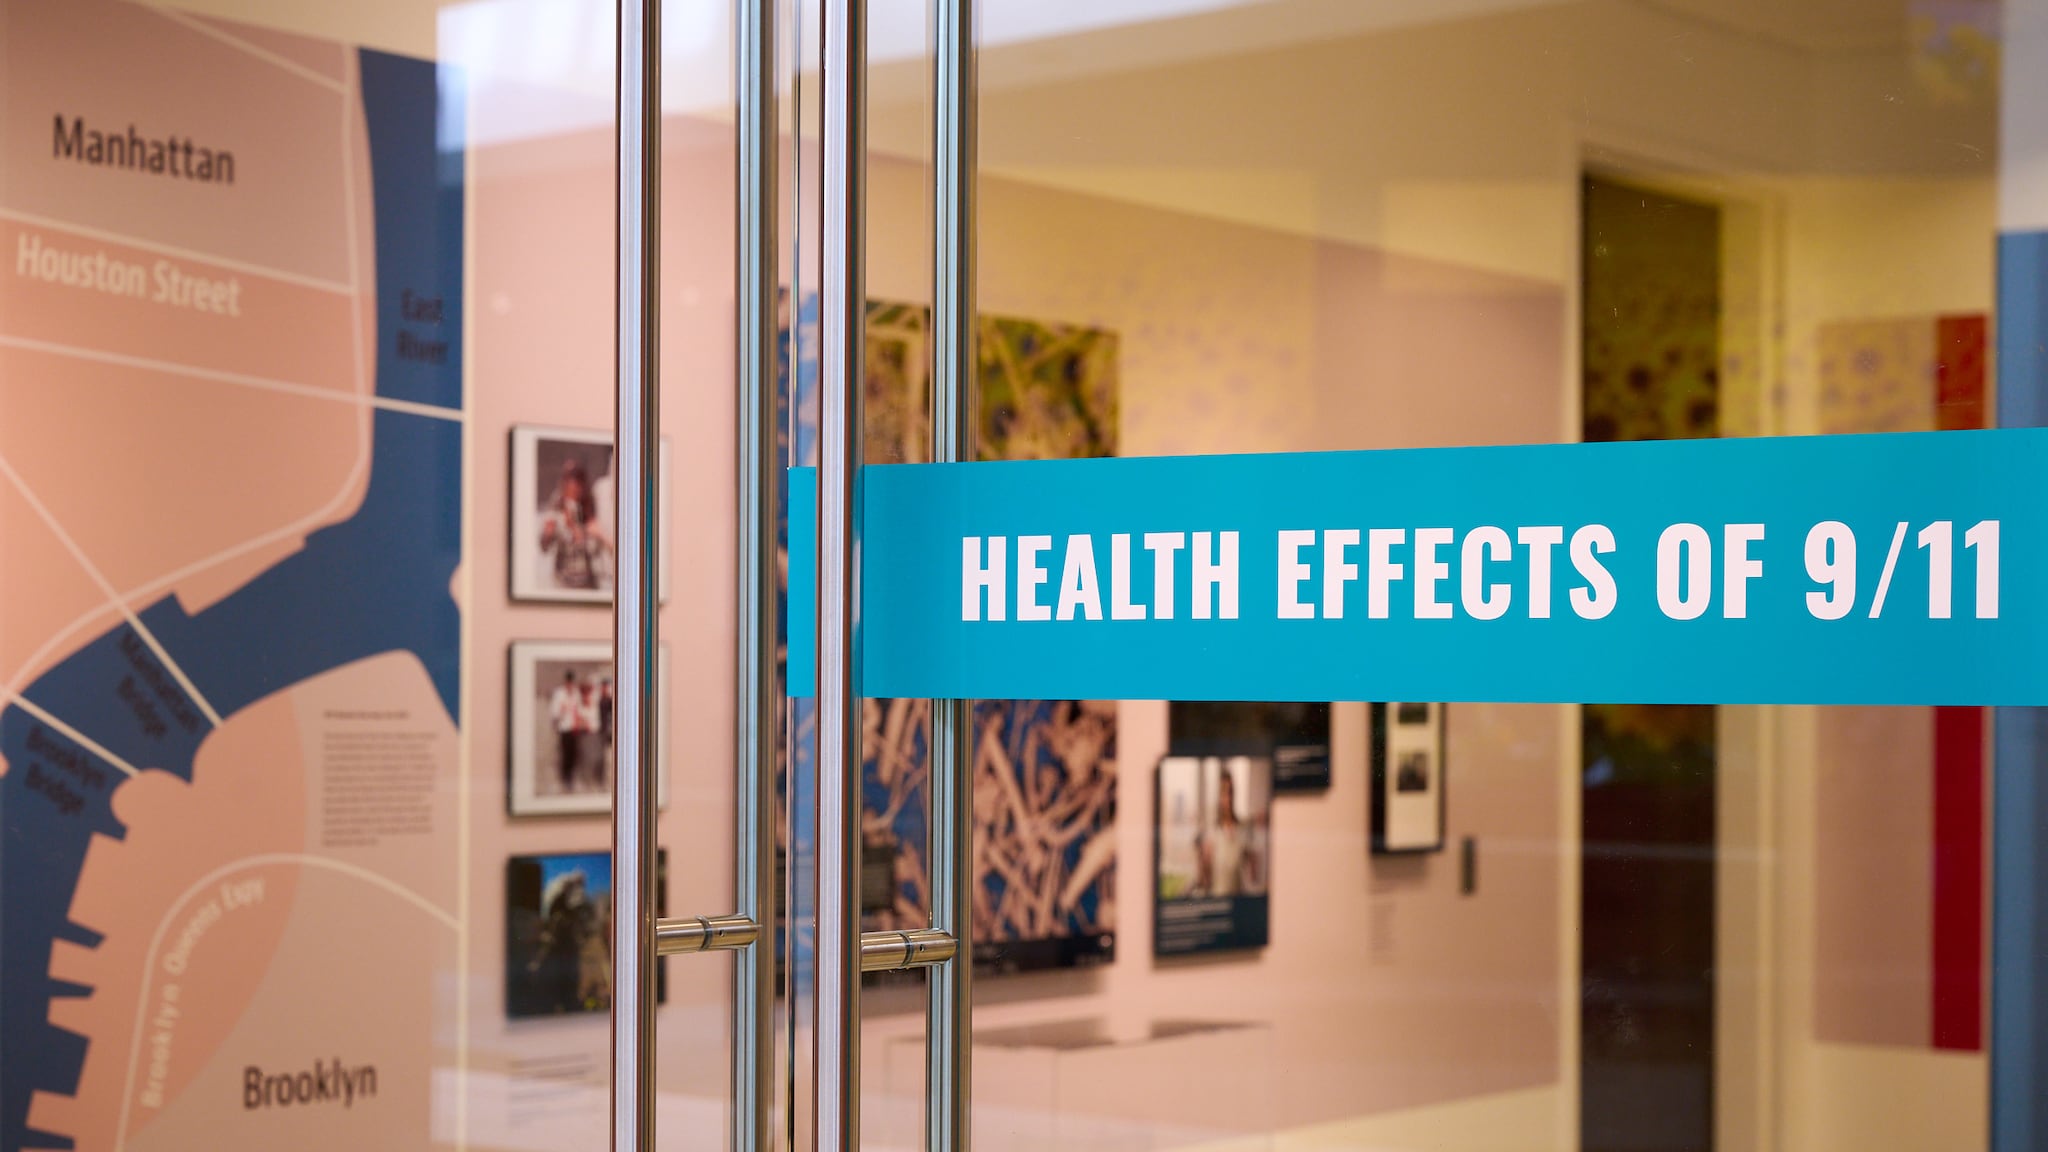 A captivating view through a glass door adorned with the exhibition title at the Health Effects of 9/11 exhibit. Beyond the door, glimpses of the exhibit come into focus, offering a symbolic look into the shared experiences and remembrance encapsulated within the display.